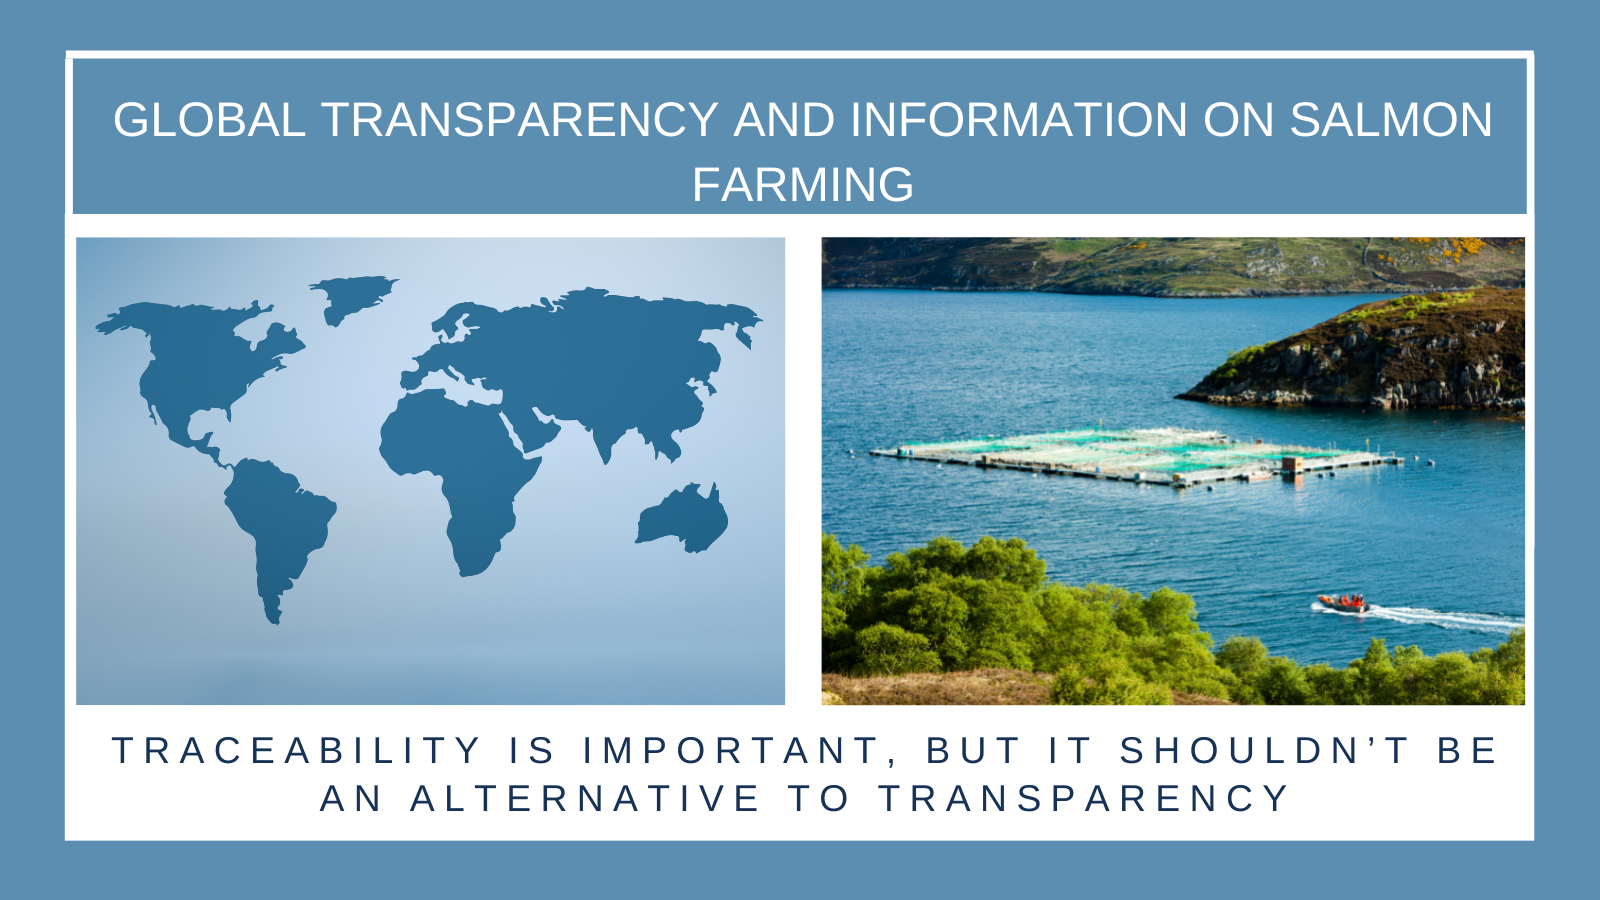 Without full transparency how can we ensure best practice across an industry which can have significant impacts on the environment?